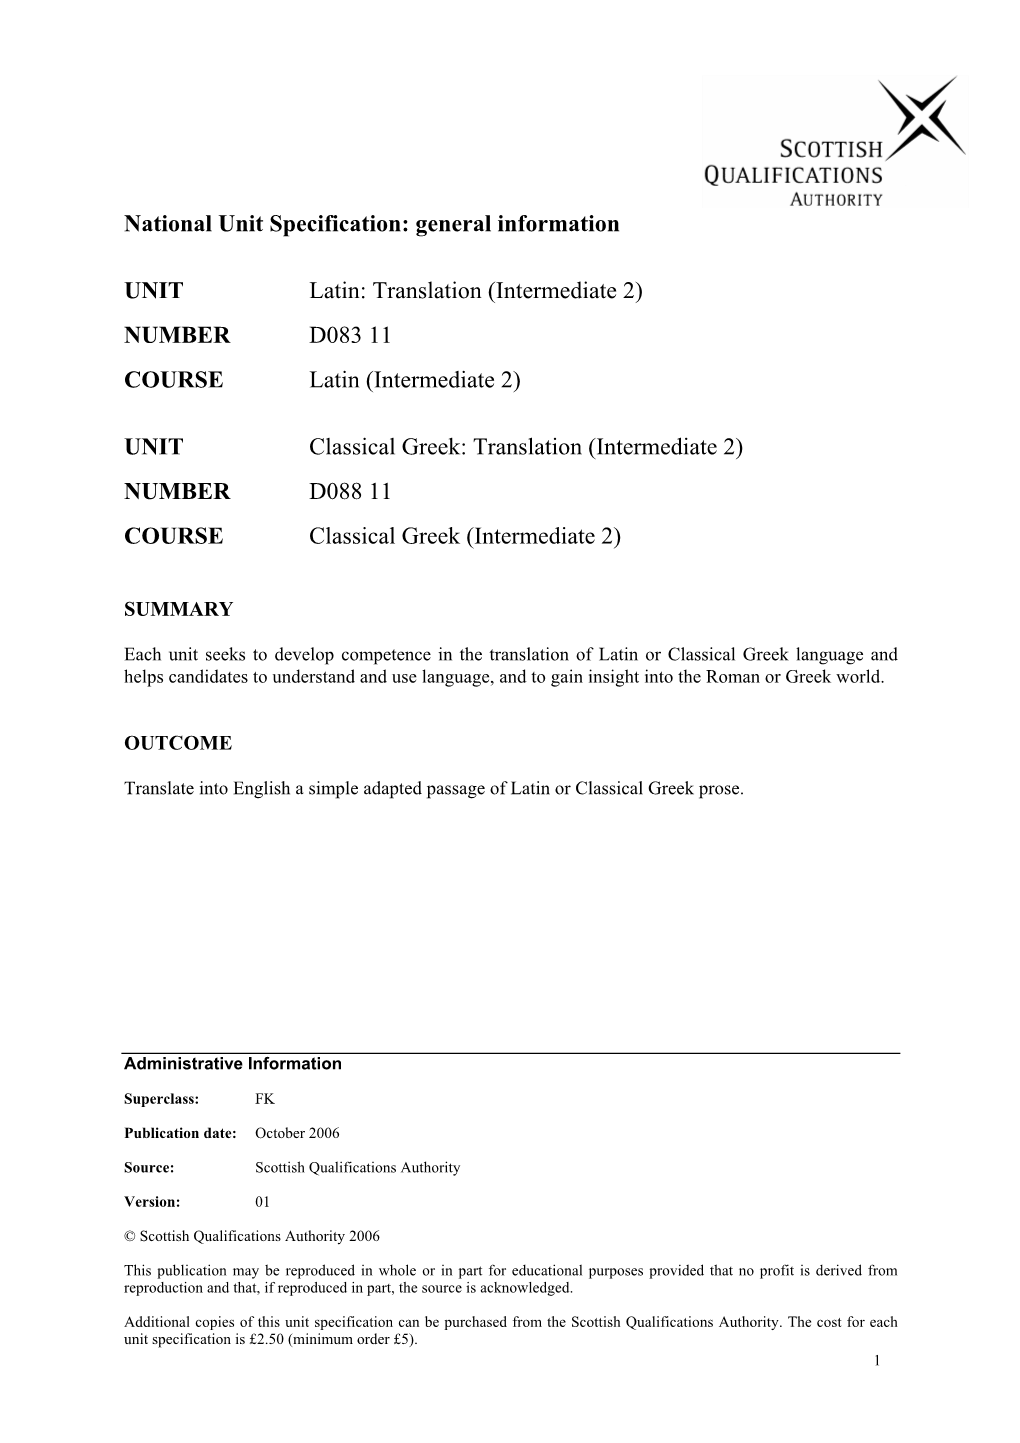 DET DRAFT Course and Unit Specifications. 02/05/96 CONFIDENTIAL